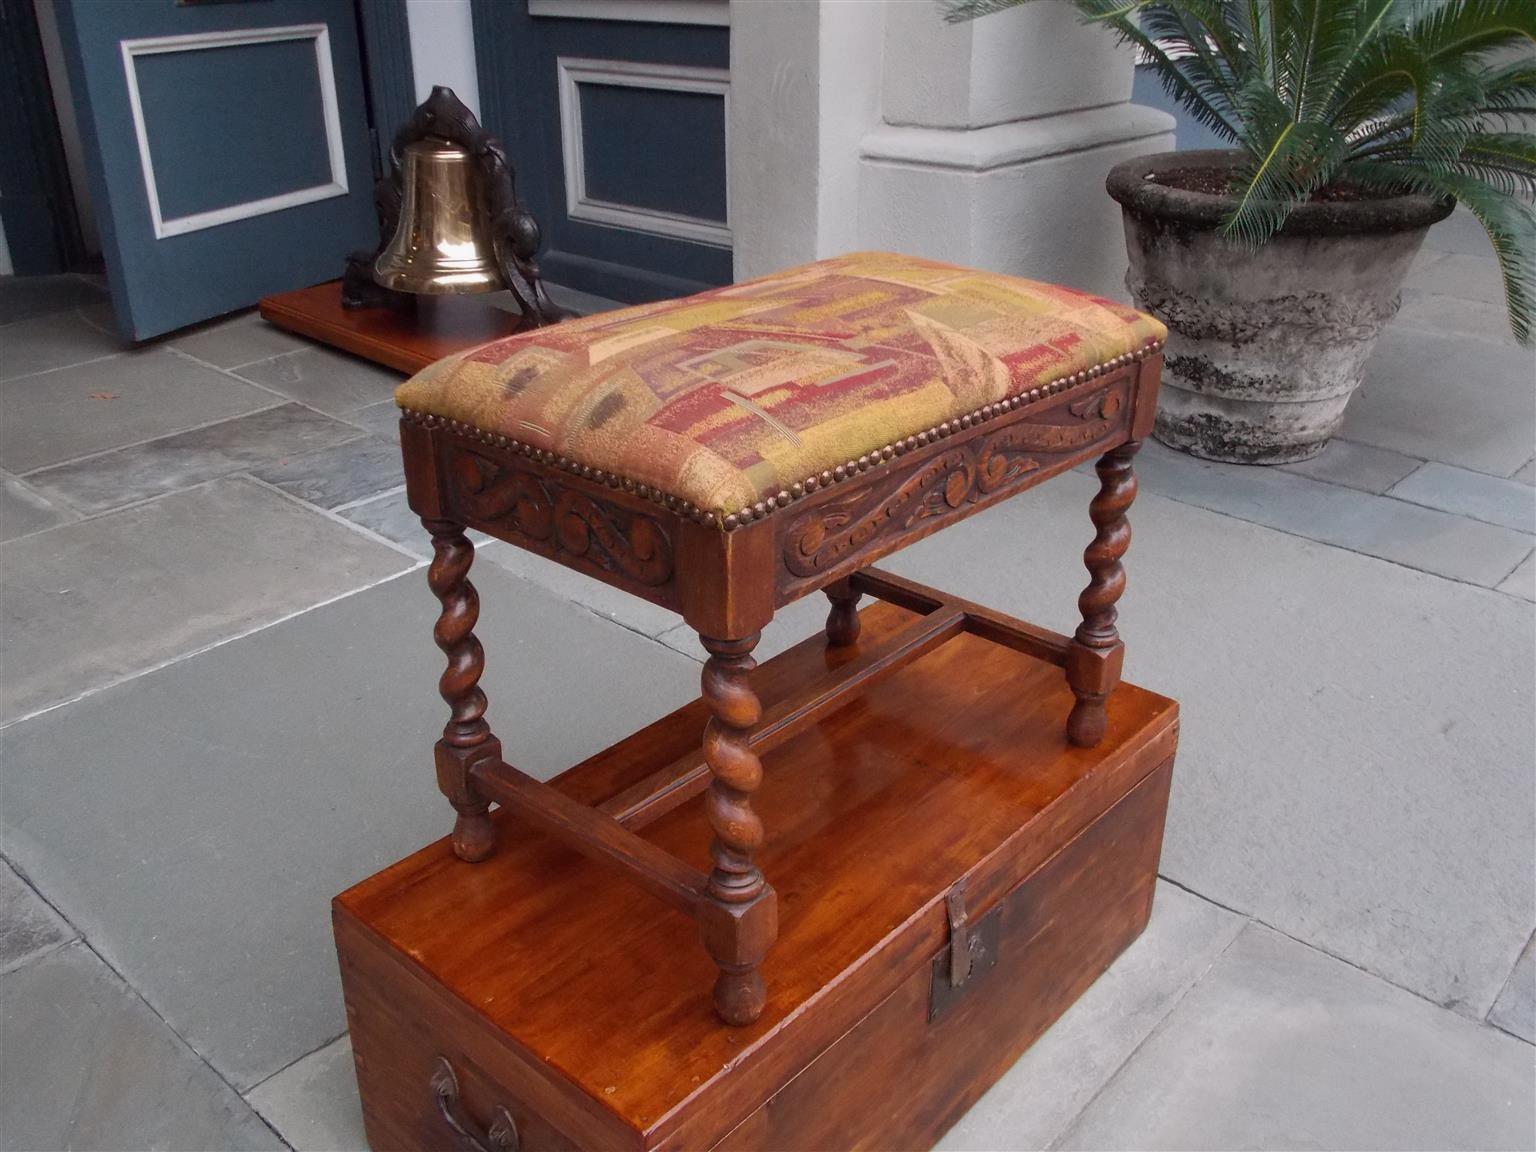 French walnut upholstered stool with brass nail head trim, decorative carved scrolled foliage apron, and resting on the original barley twist legs with connecting stretchers. Mid-19th century.